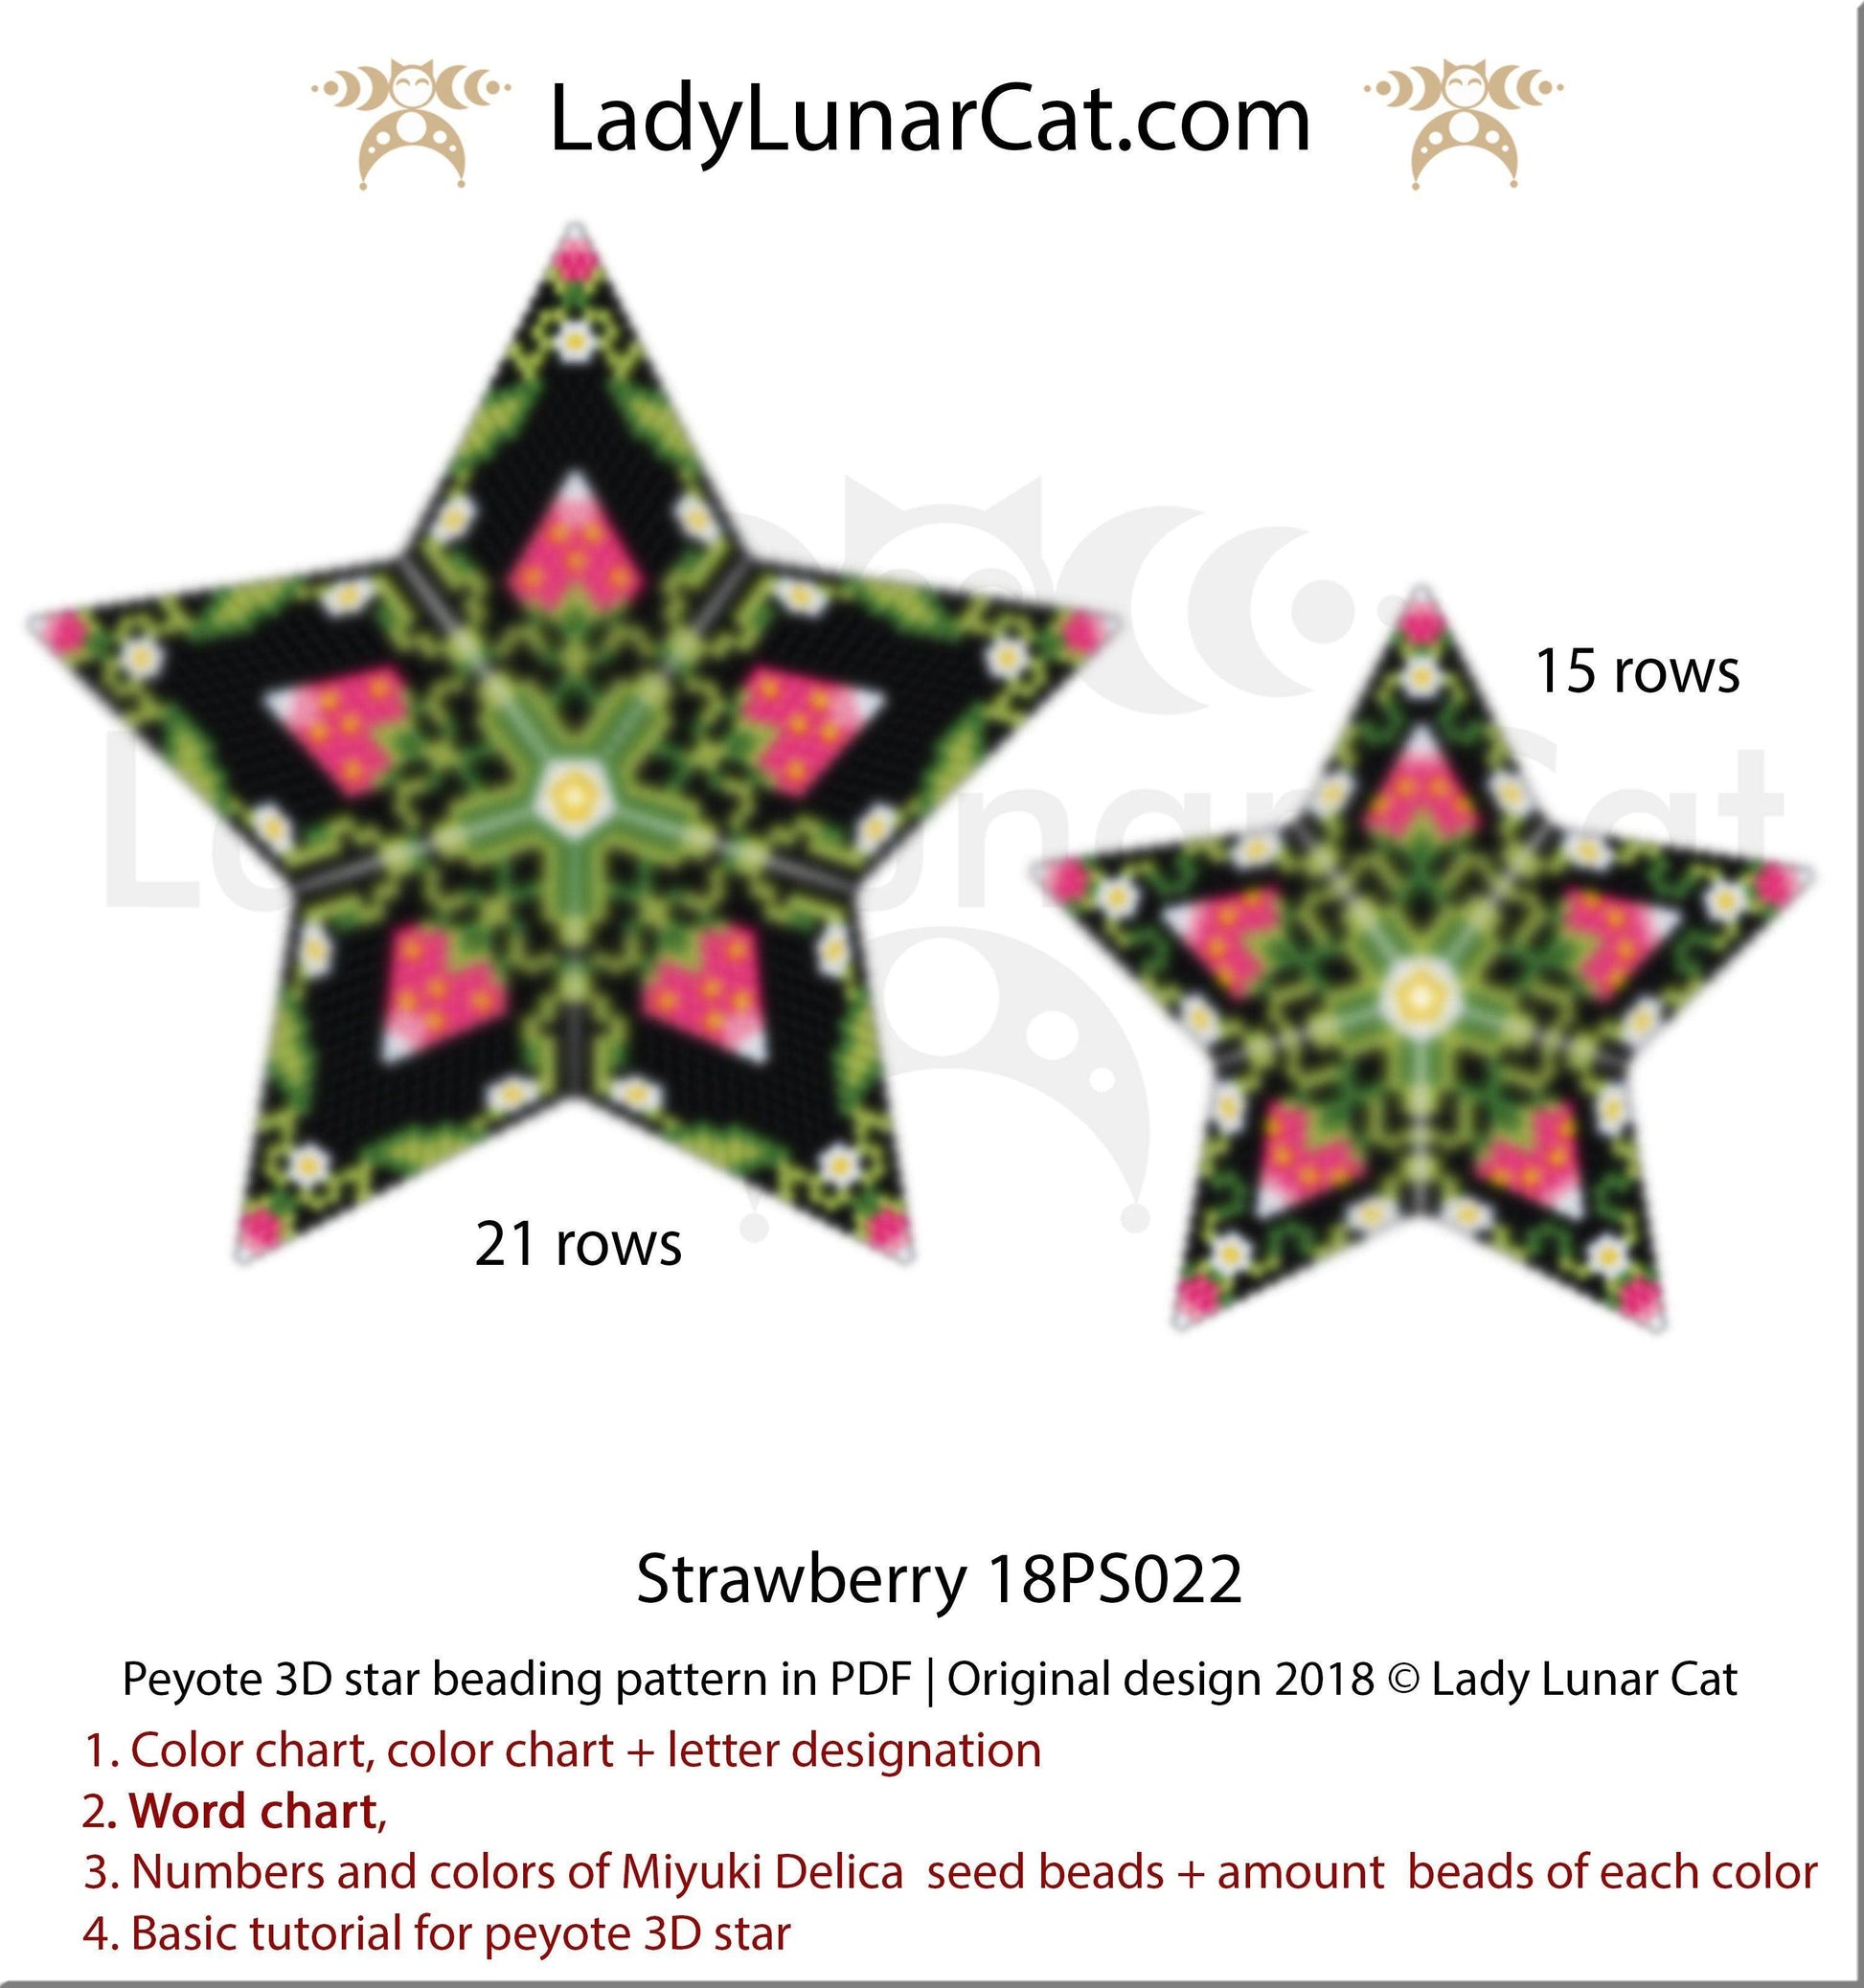 Copy of Beaded star pattern - Tulips 19PS007 | Seed beads tutorial for 3D peyote star LadyLunarCat